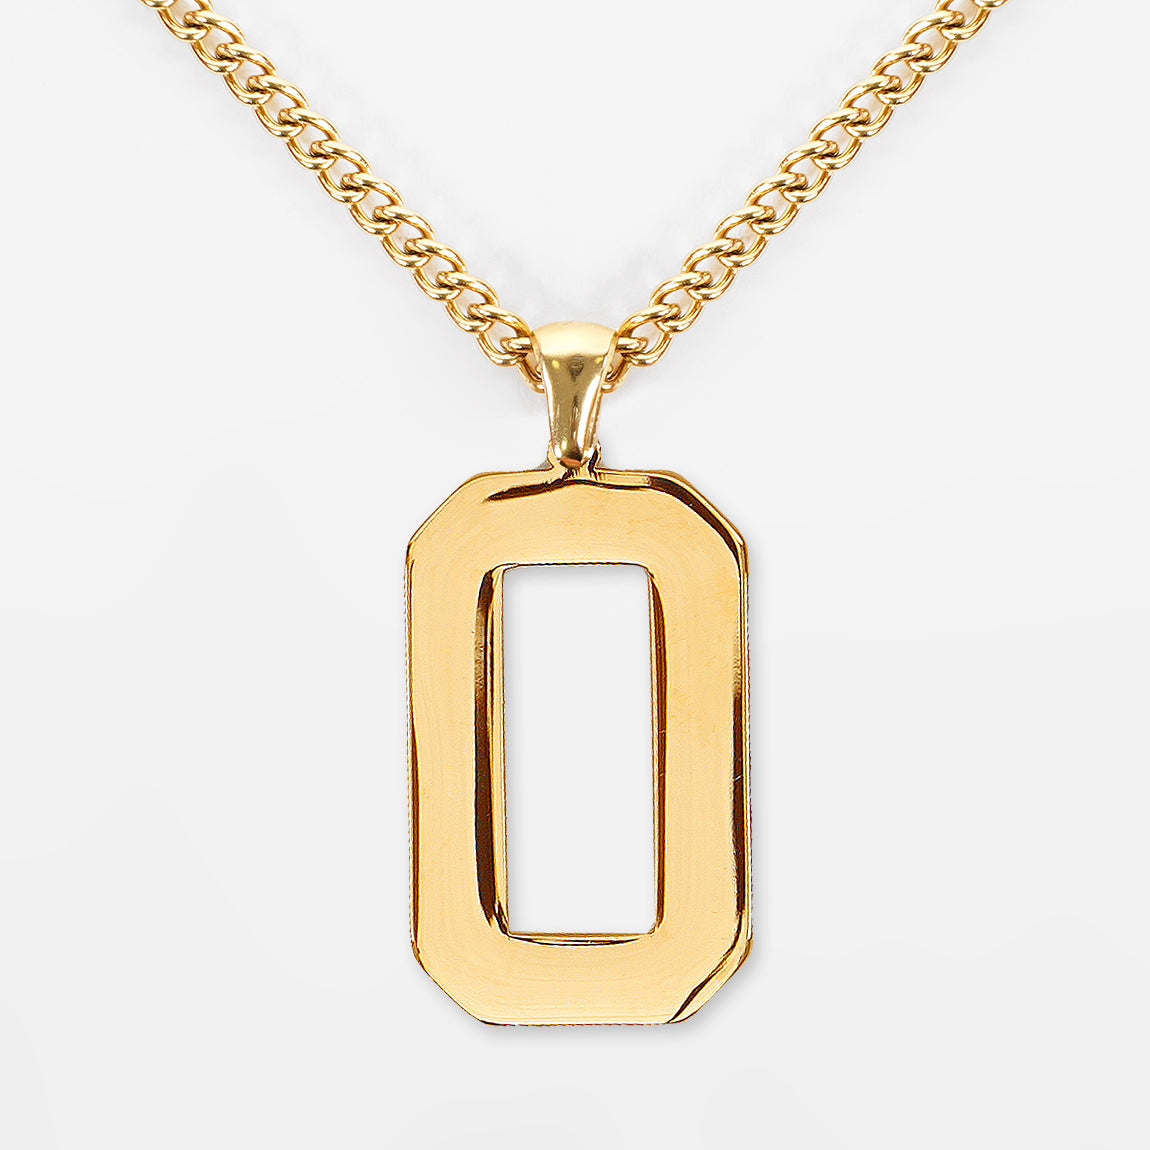 0 Number Pendant with Chain Kids Necklace - Gold Plated Stainless Steel